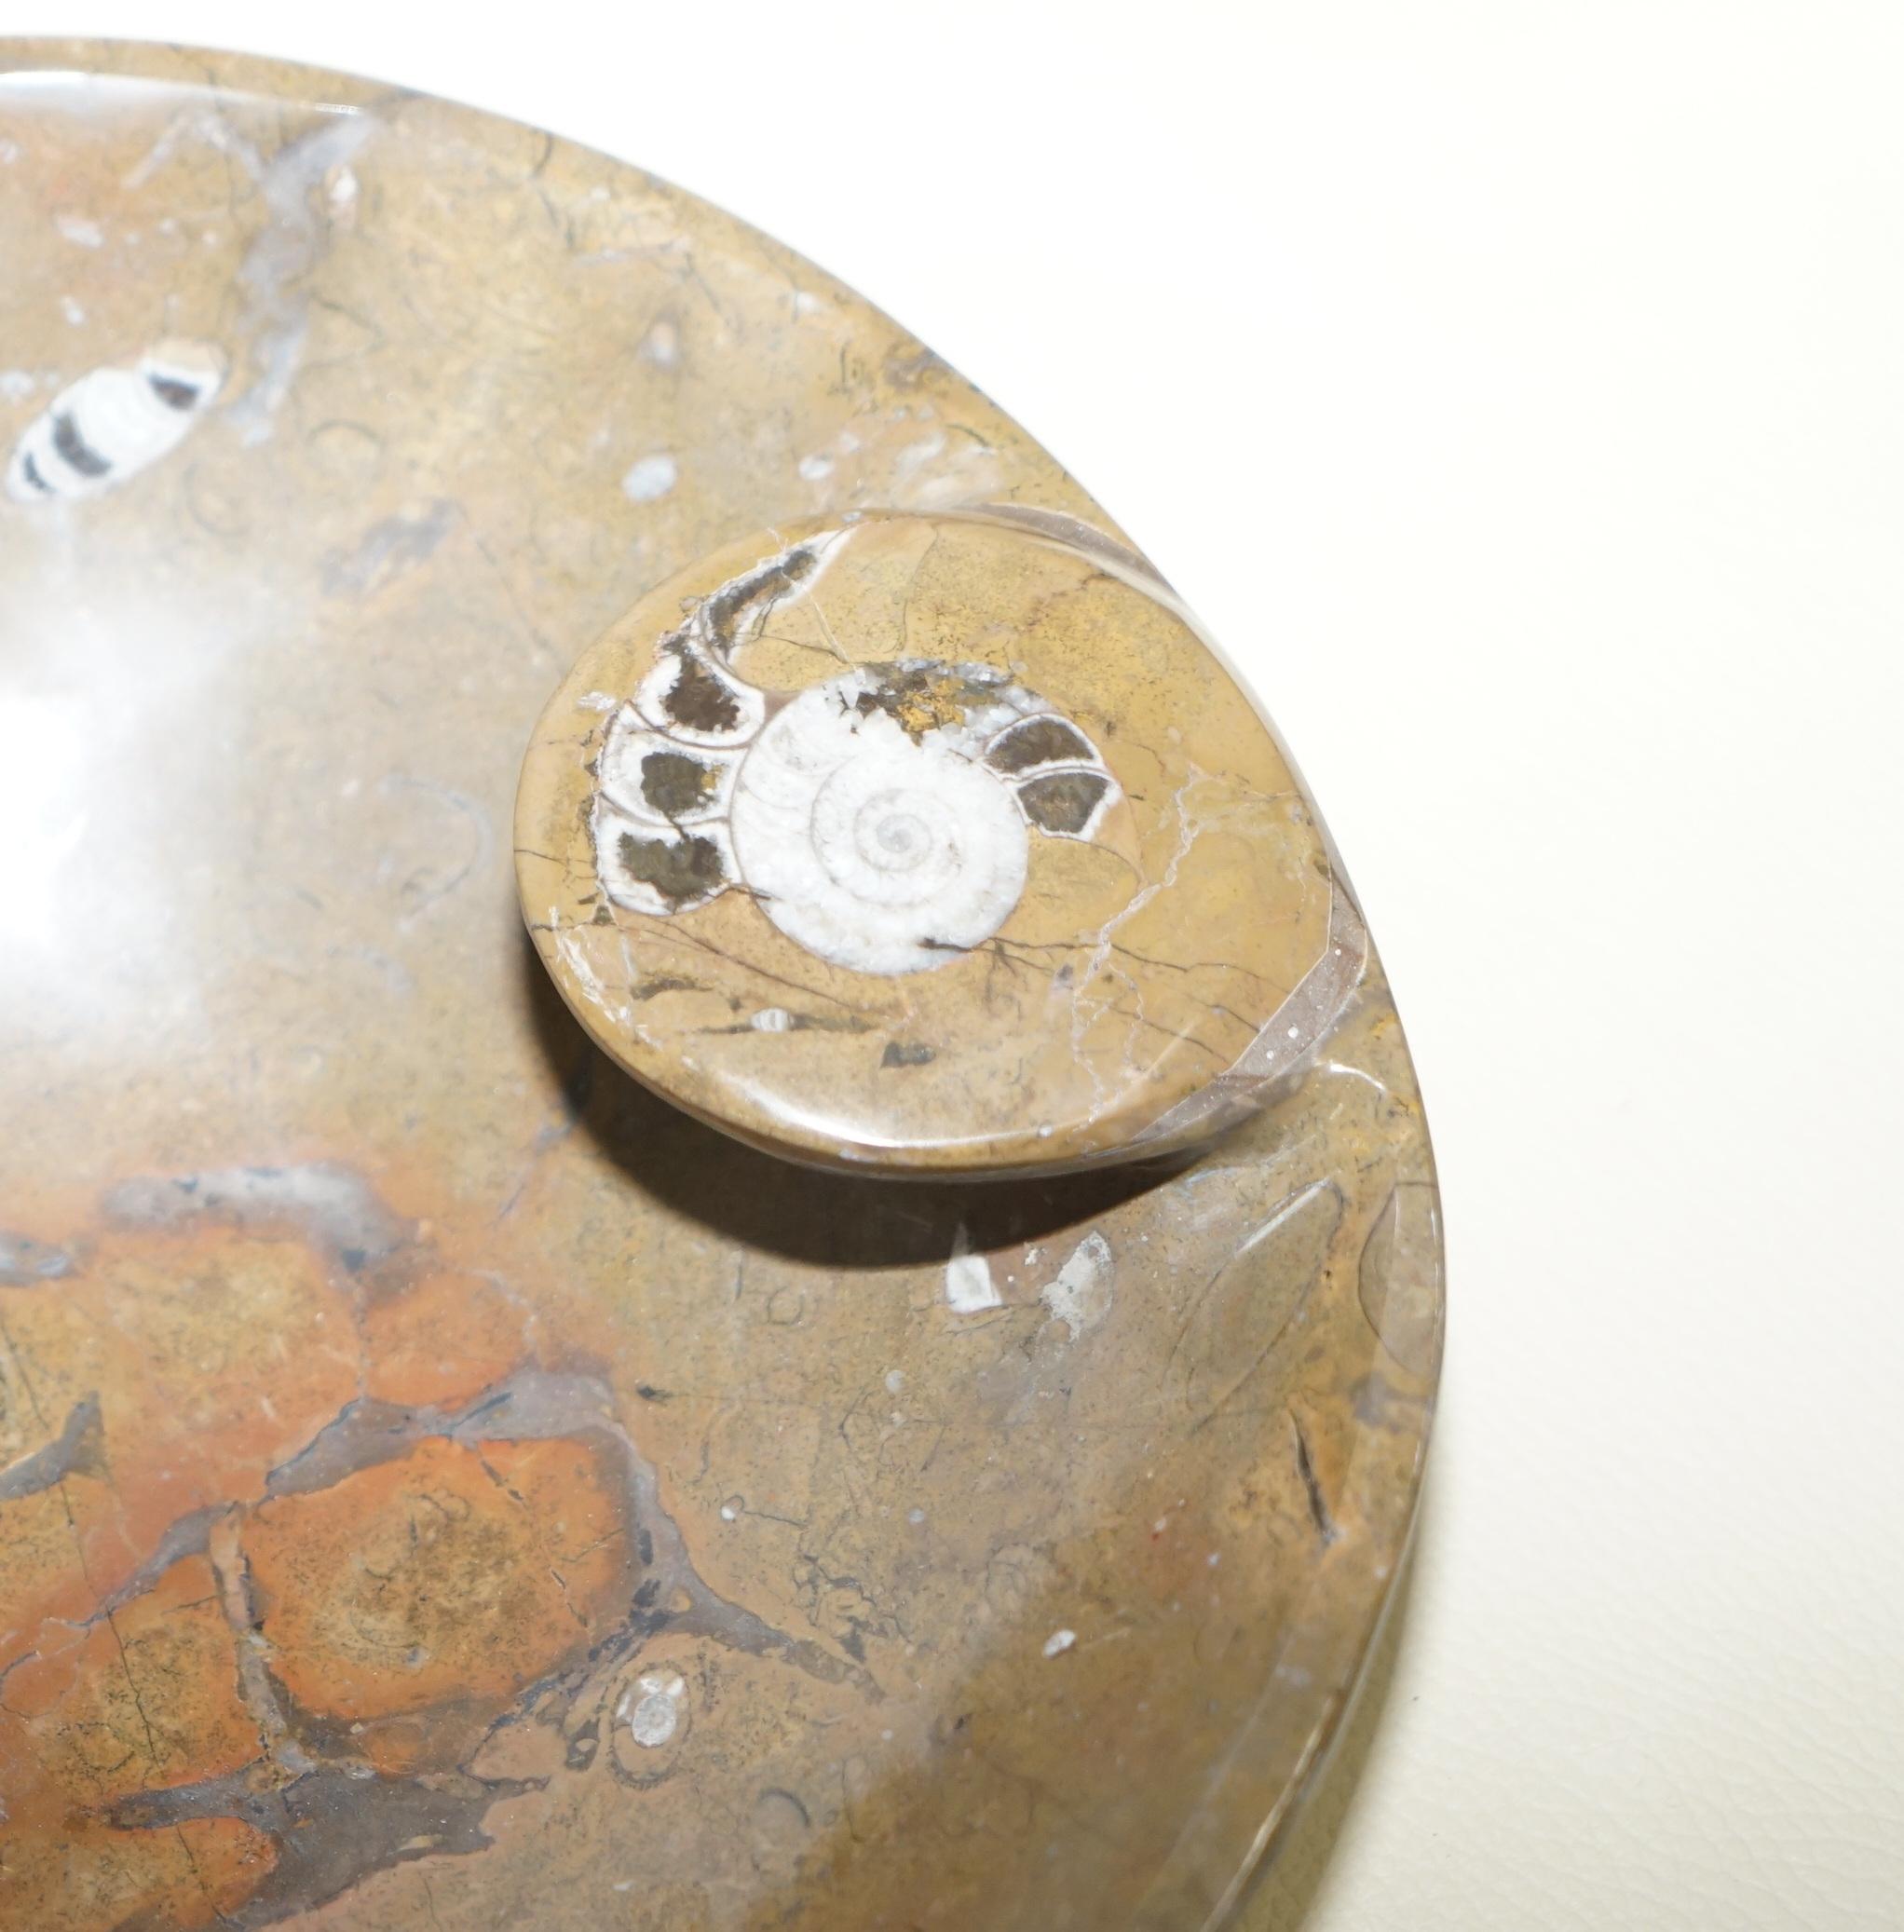 Other 1 of 4 Very Rare Moroccan Ammonite Atlas Mountains Fossil Bowls Marble Finish For Sale